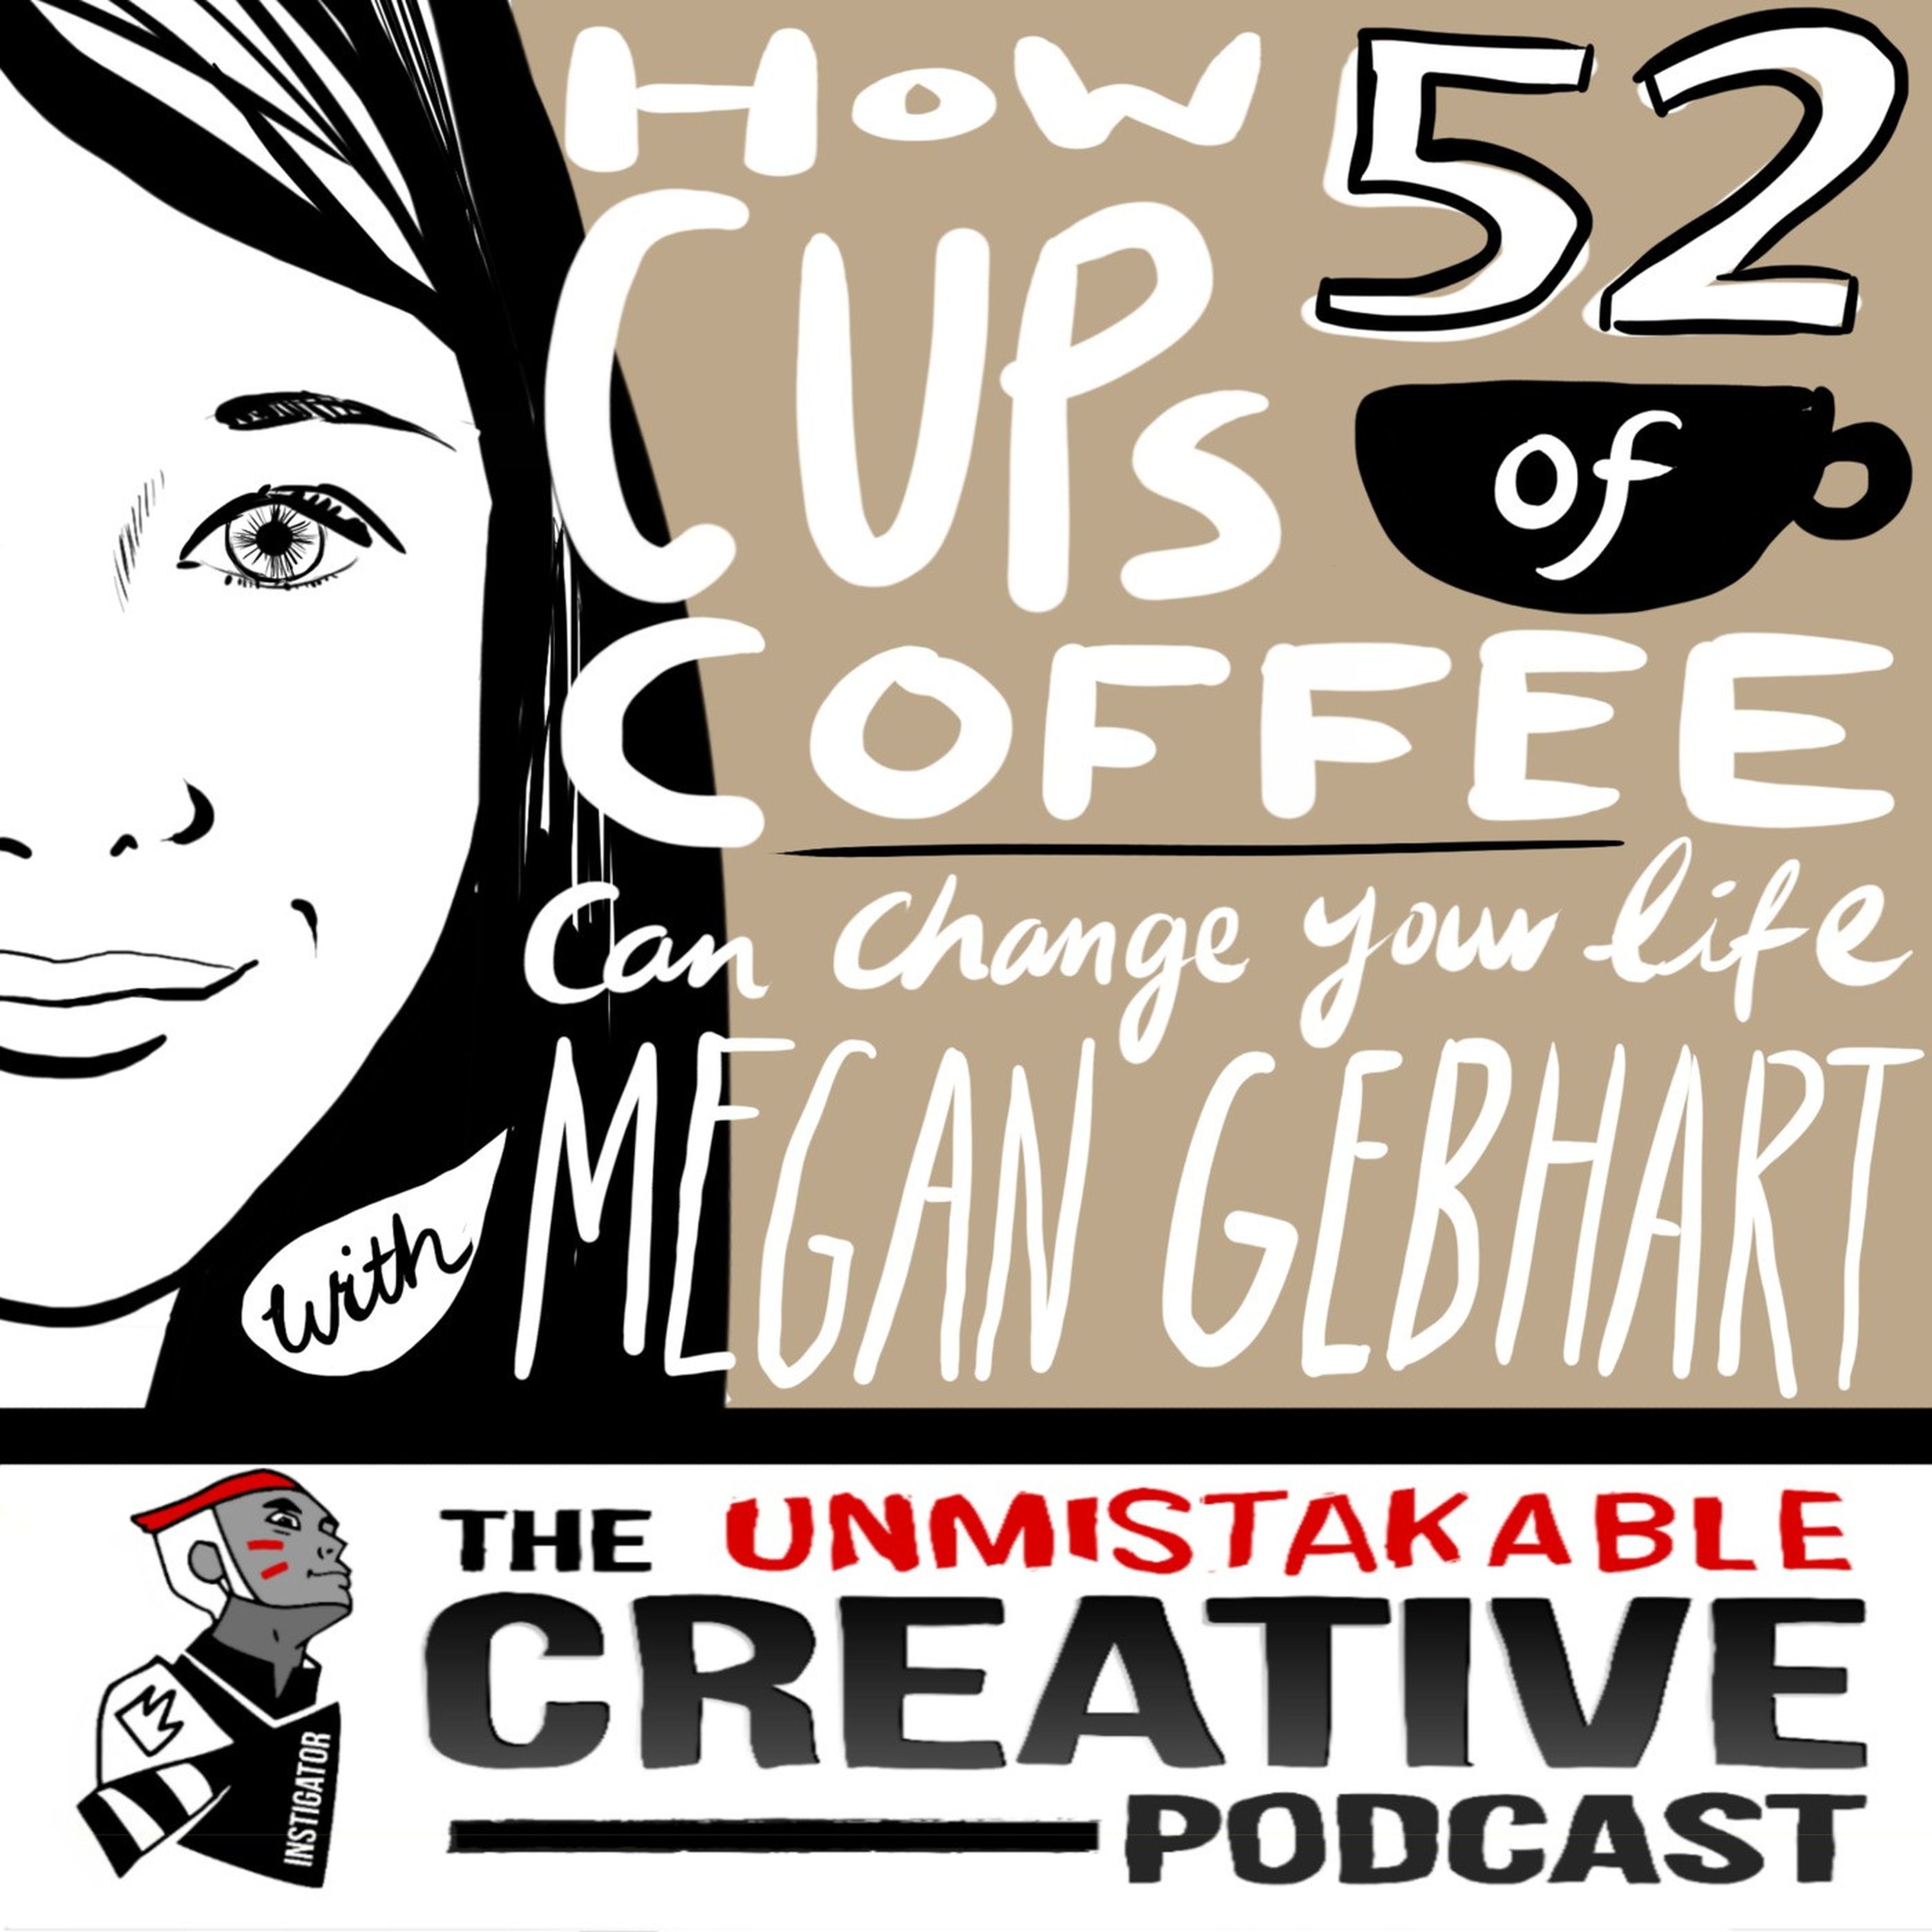 How 52 Cups of Coffee Can Change Your Life with Megan Gebhart